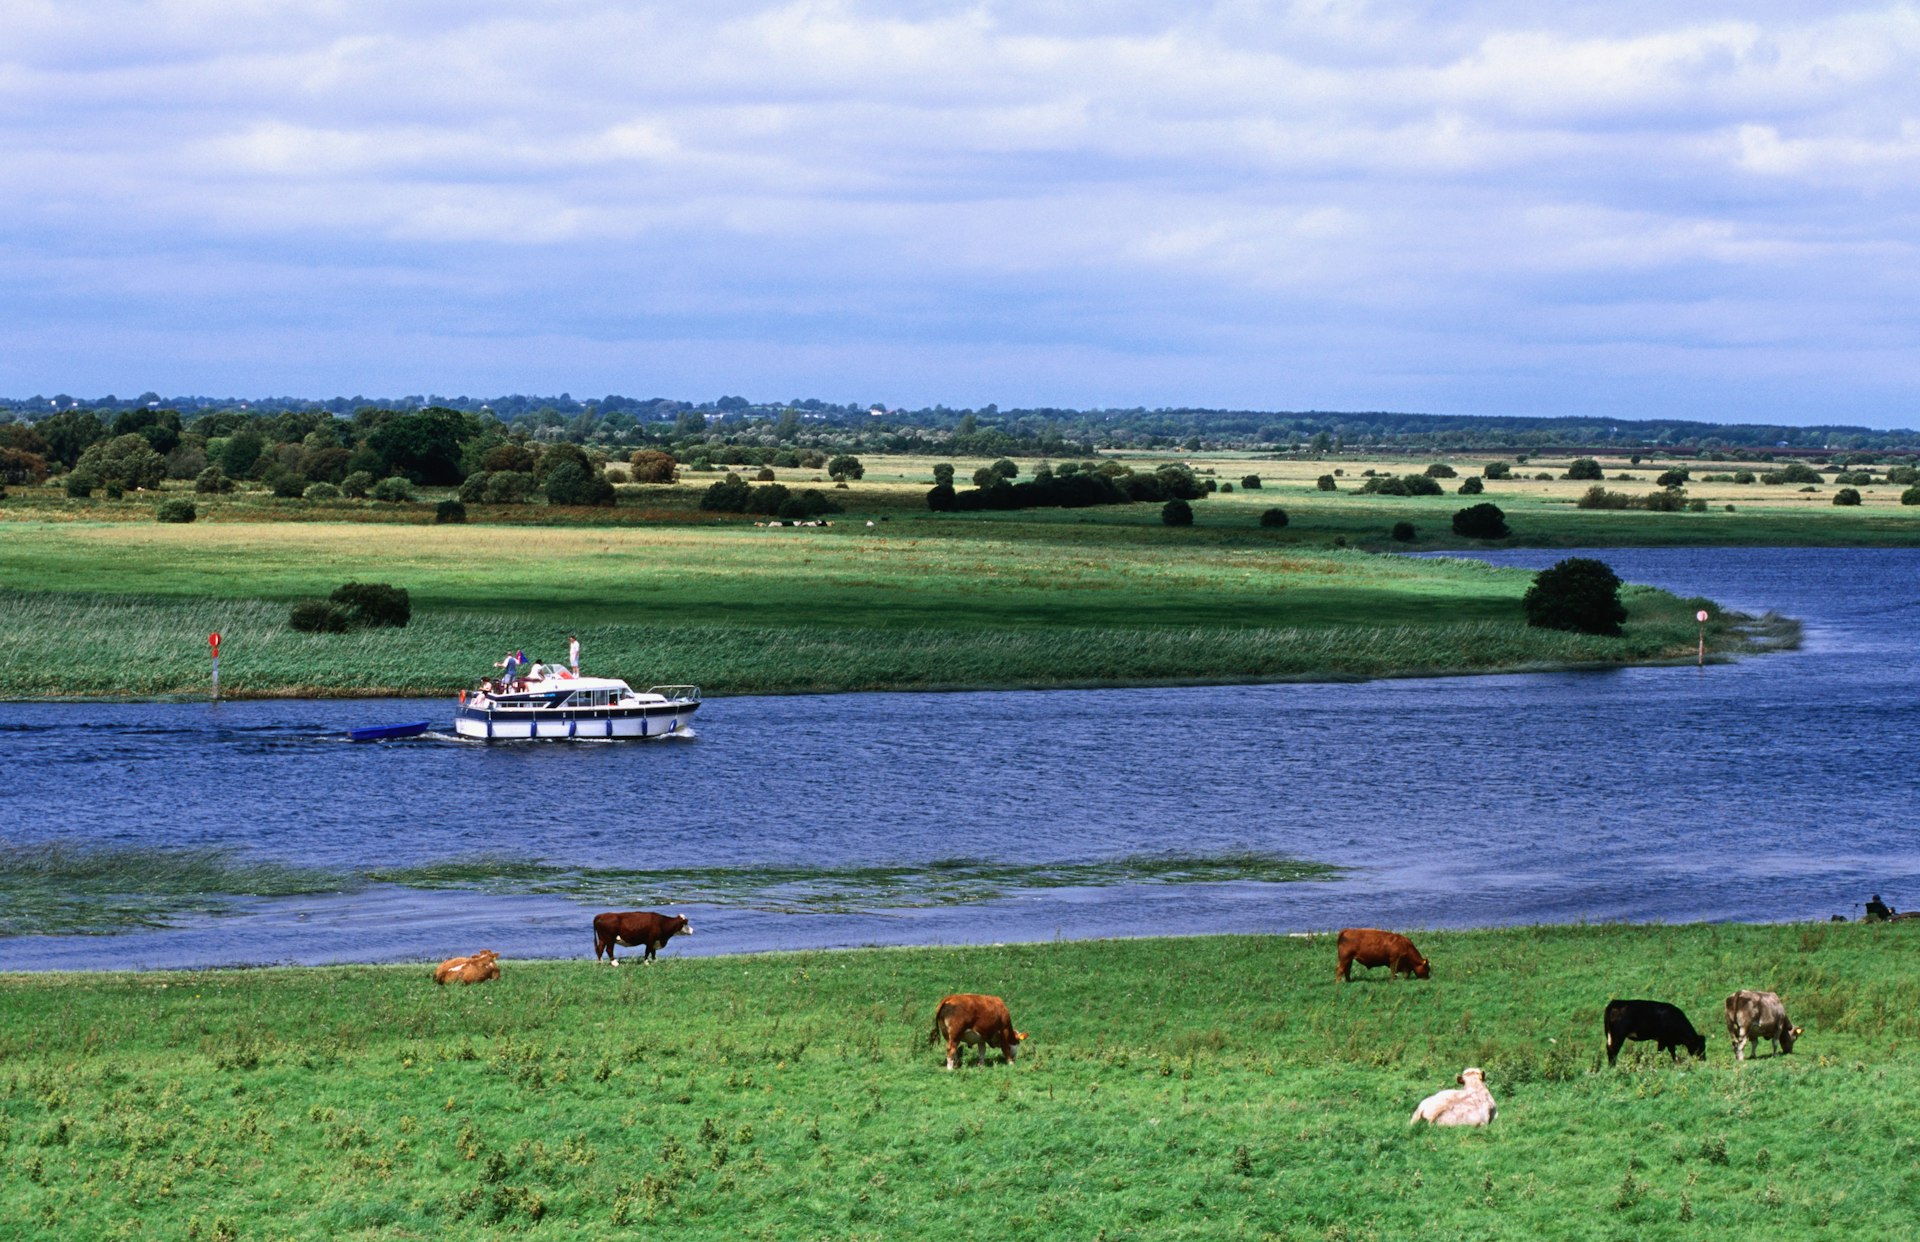 A boat on the River Shannon, Clonmacnoise, County Offaly, Ireland, Europe